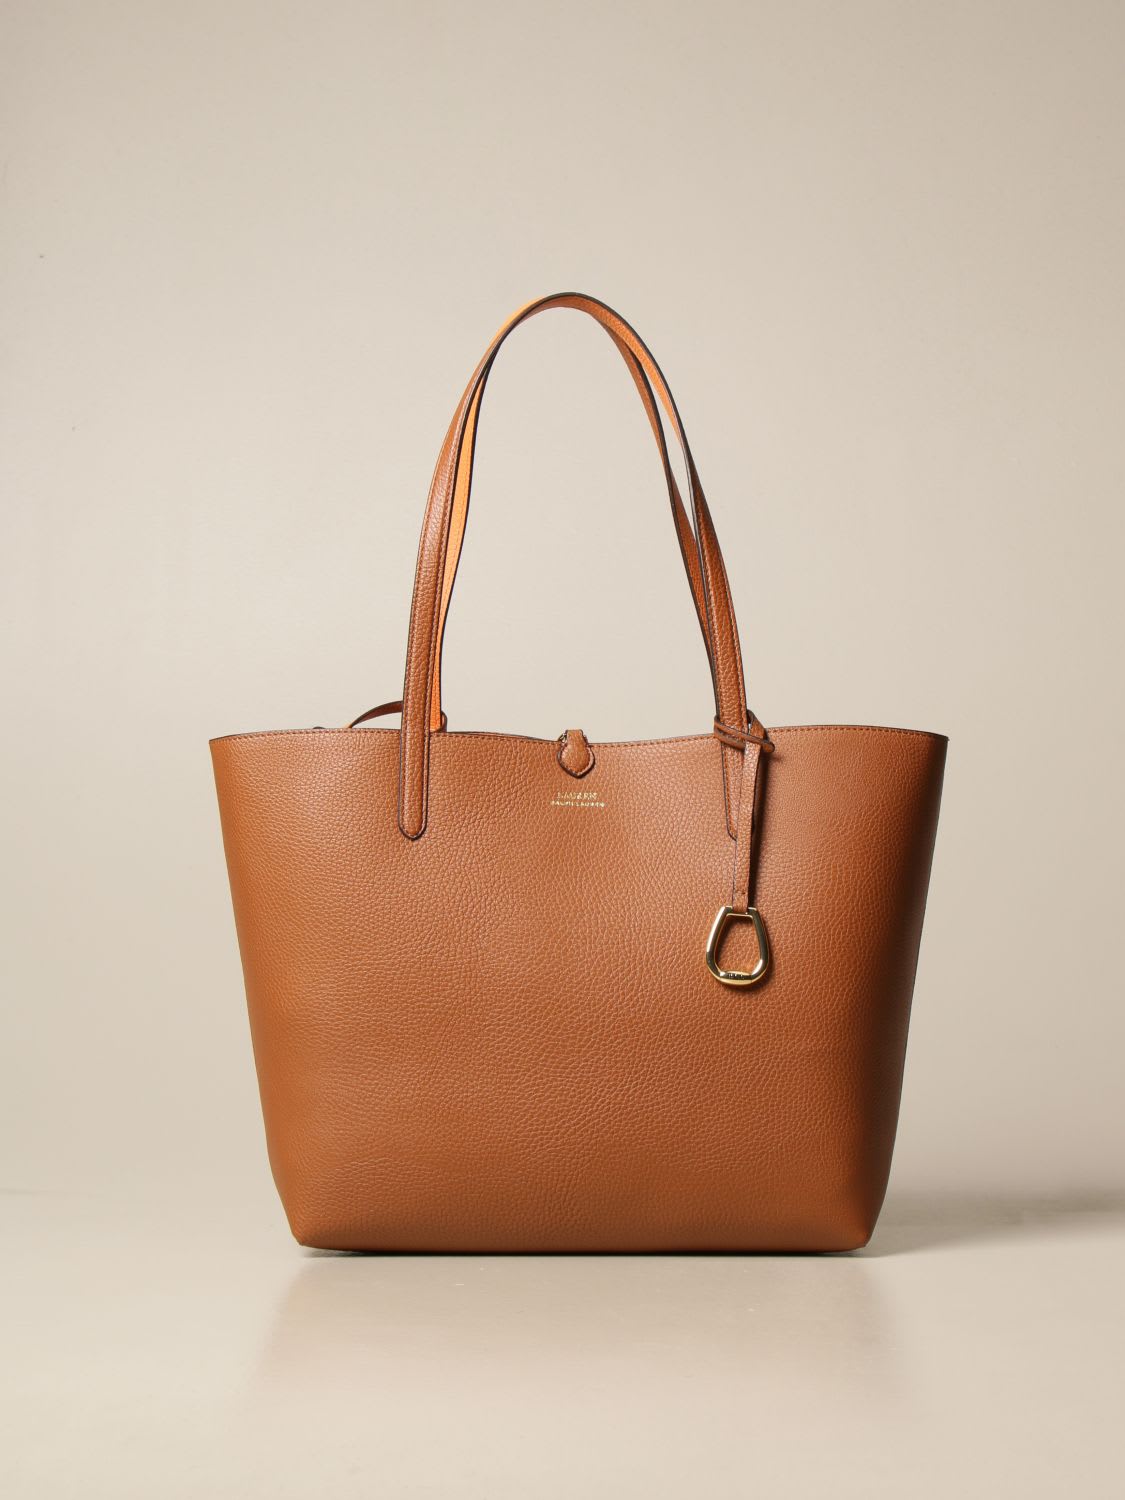 Lauren Ralph Lauren Tote Bags Lauren Ralph Lauren Reversible Bag In Textured Synthetic Leather